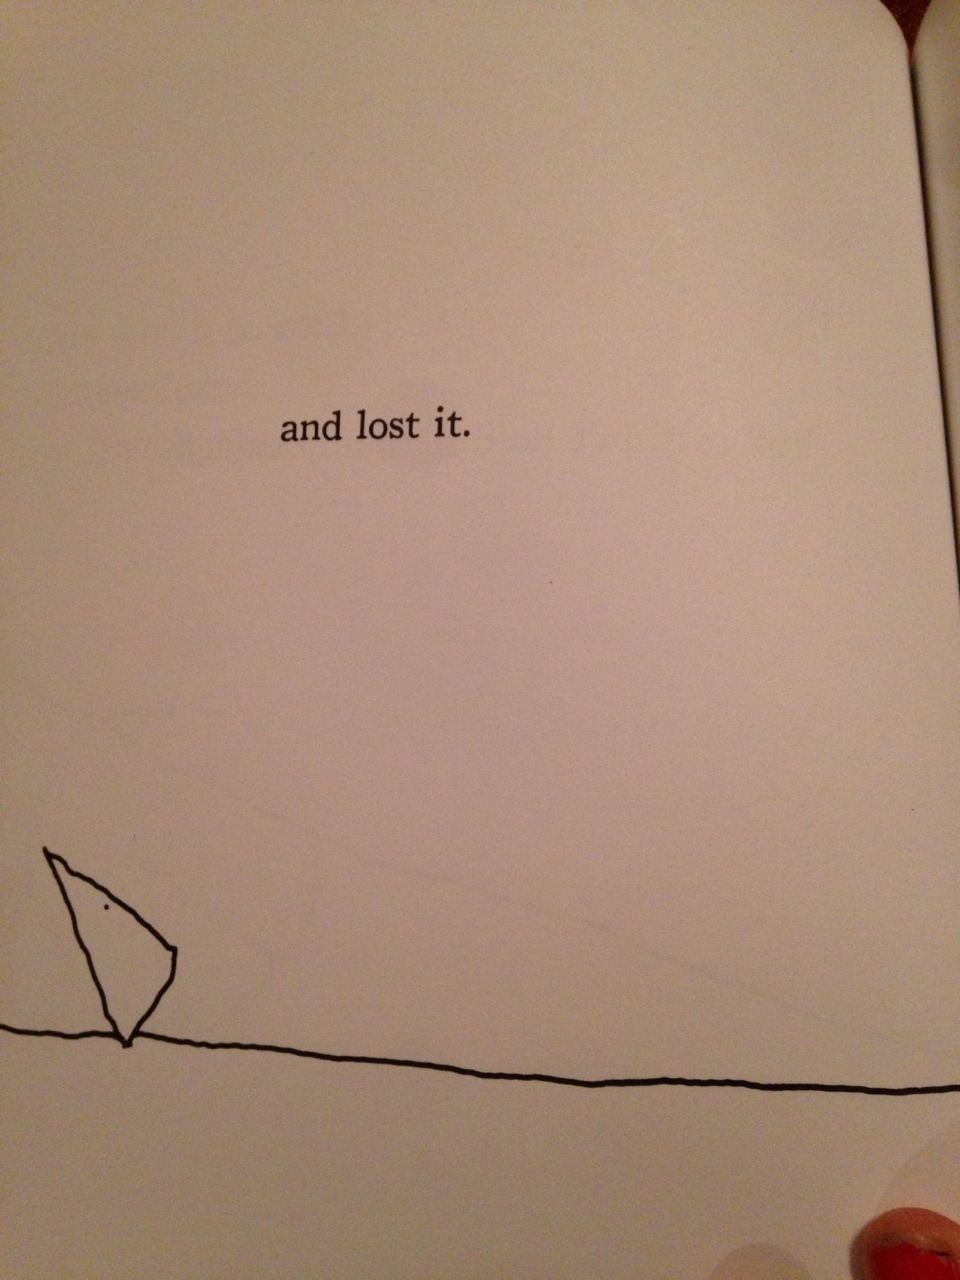 s-i-n-n-n-e-r:  Shel Silverstein can teach me a lot about love and relationships